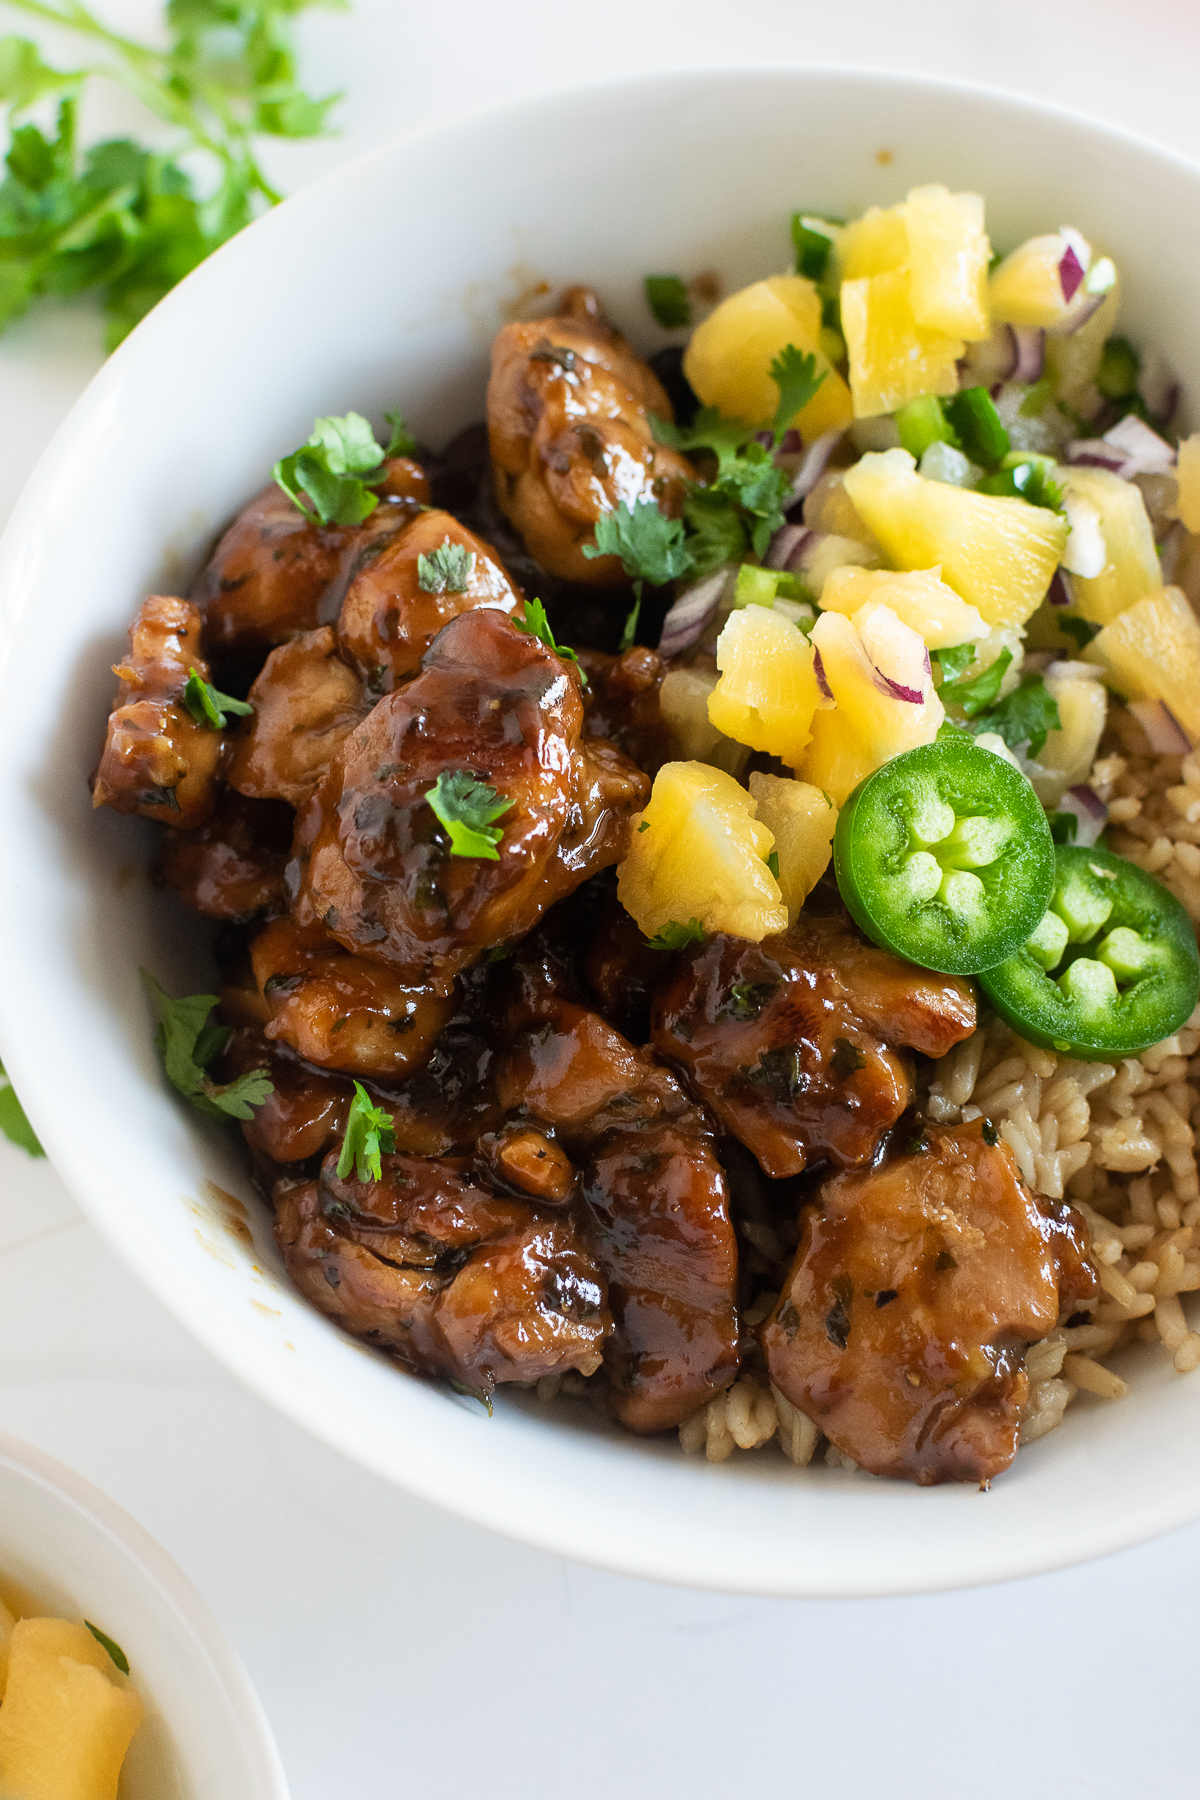 Juicy, tender and sweet– this cilantro orange chicken is minimum effort with maximum flavor making it an ideal dinner recipe for busy weeknights. The marinade adds incredible flavor to the chicken and creates the best sauce. Serve it alongside rice and beans with a homemade pineapple jalapeño salsa.